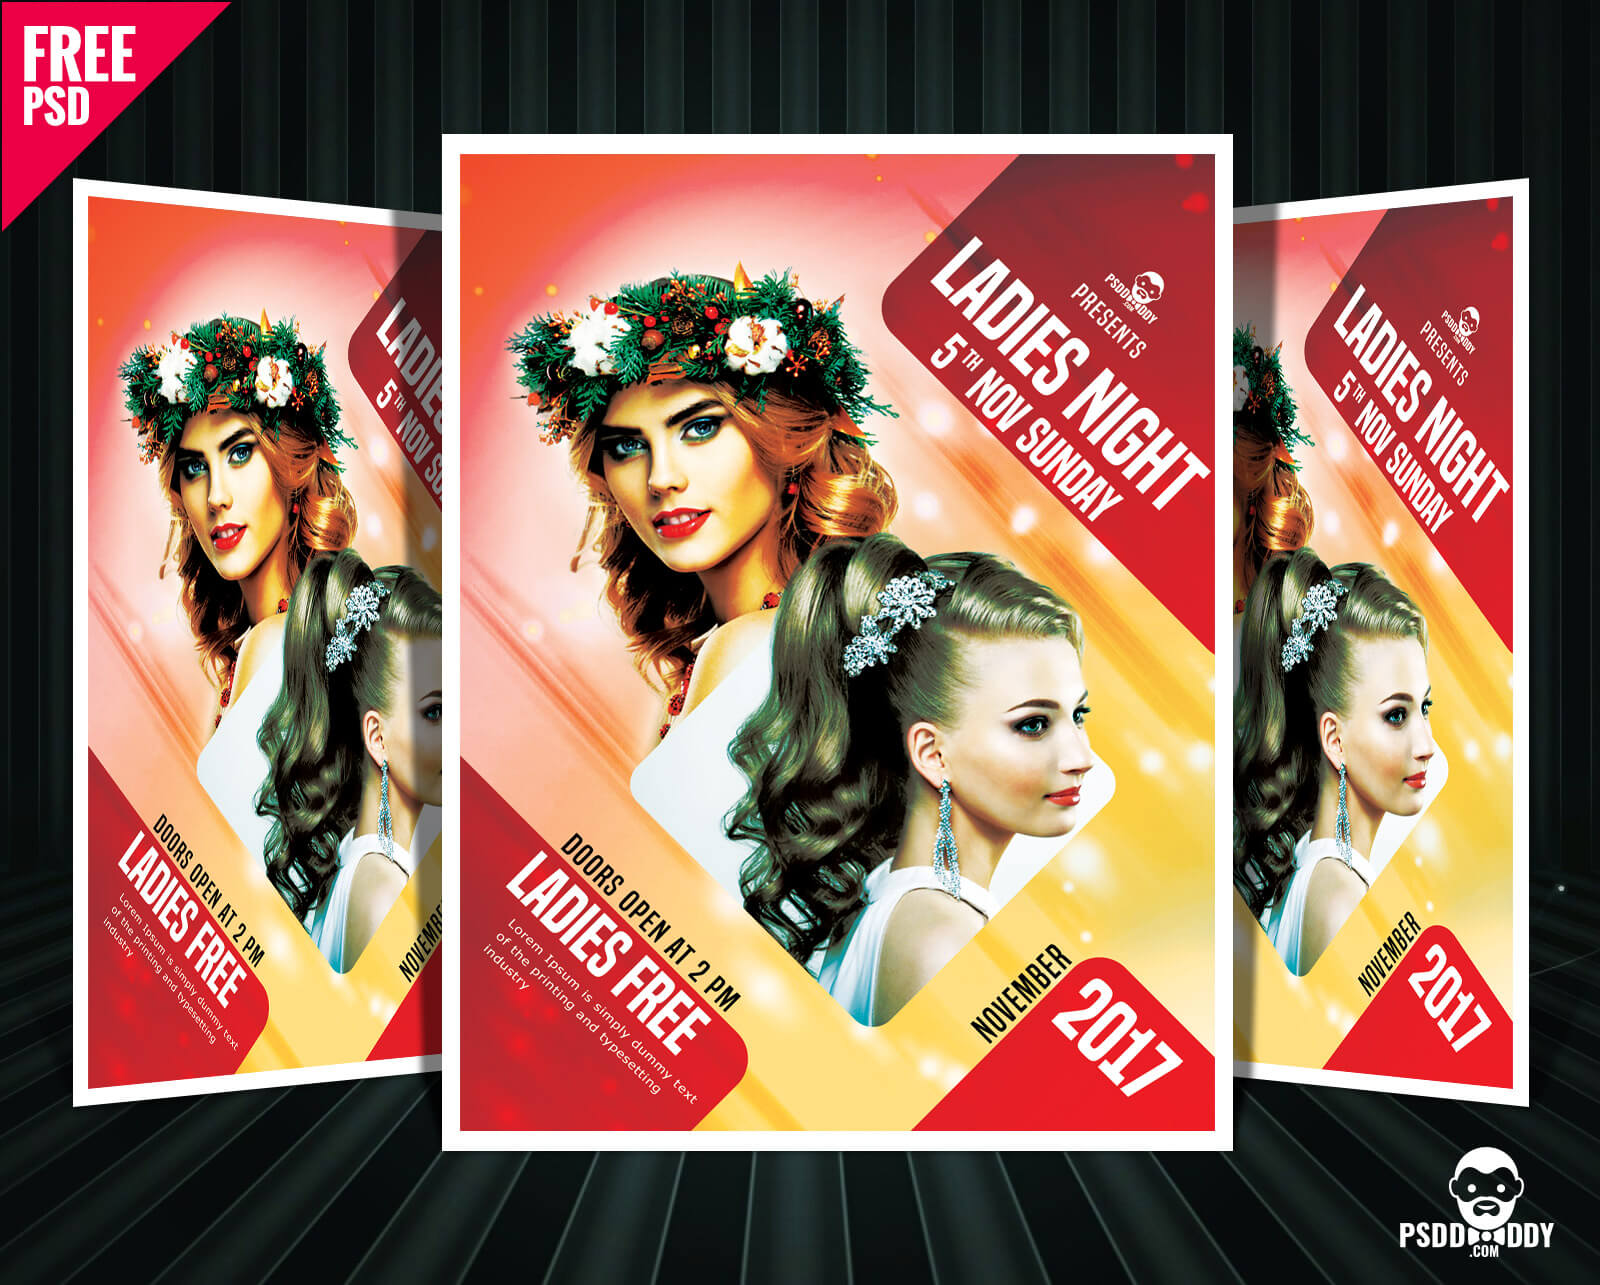 Download] Ladies Night Party Flyer Free Psd | Psddaddy Inside Birthday Party Flyer Templates Free